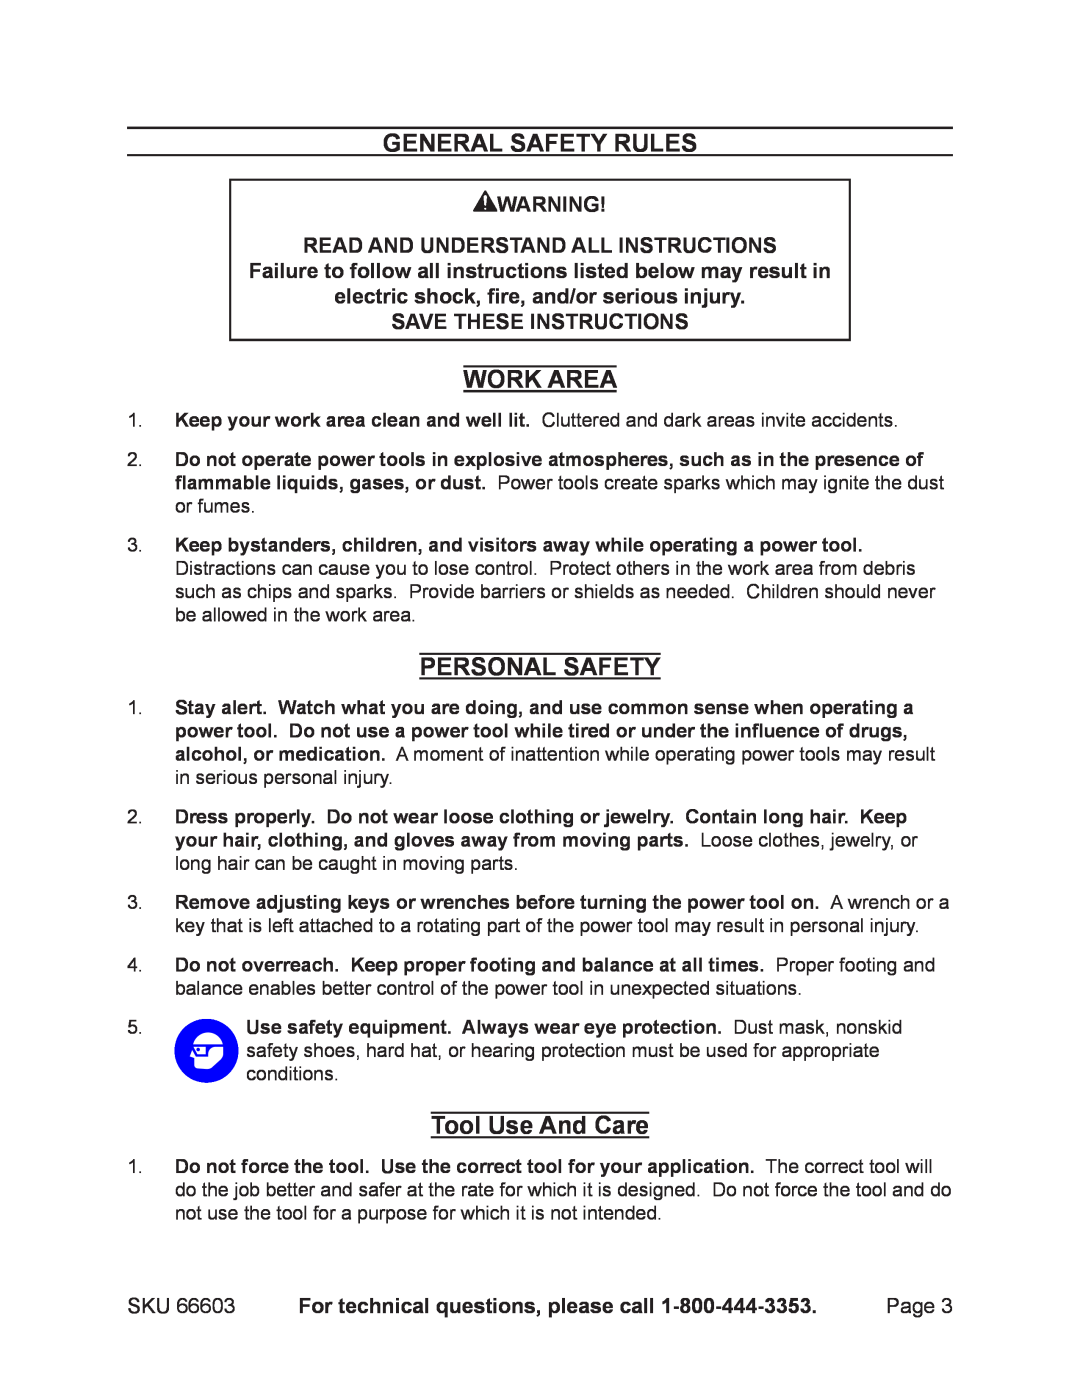 Chicago Electric 66603 manual General Safety Rules, Work Area, Personal Safety, Tool Use And Care 